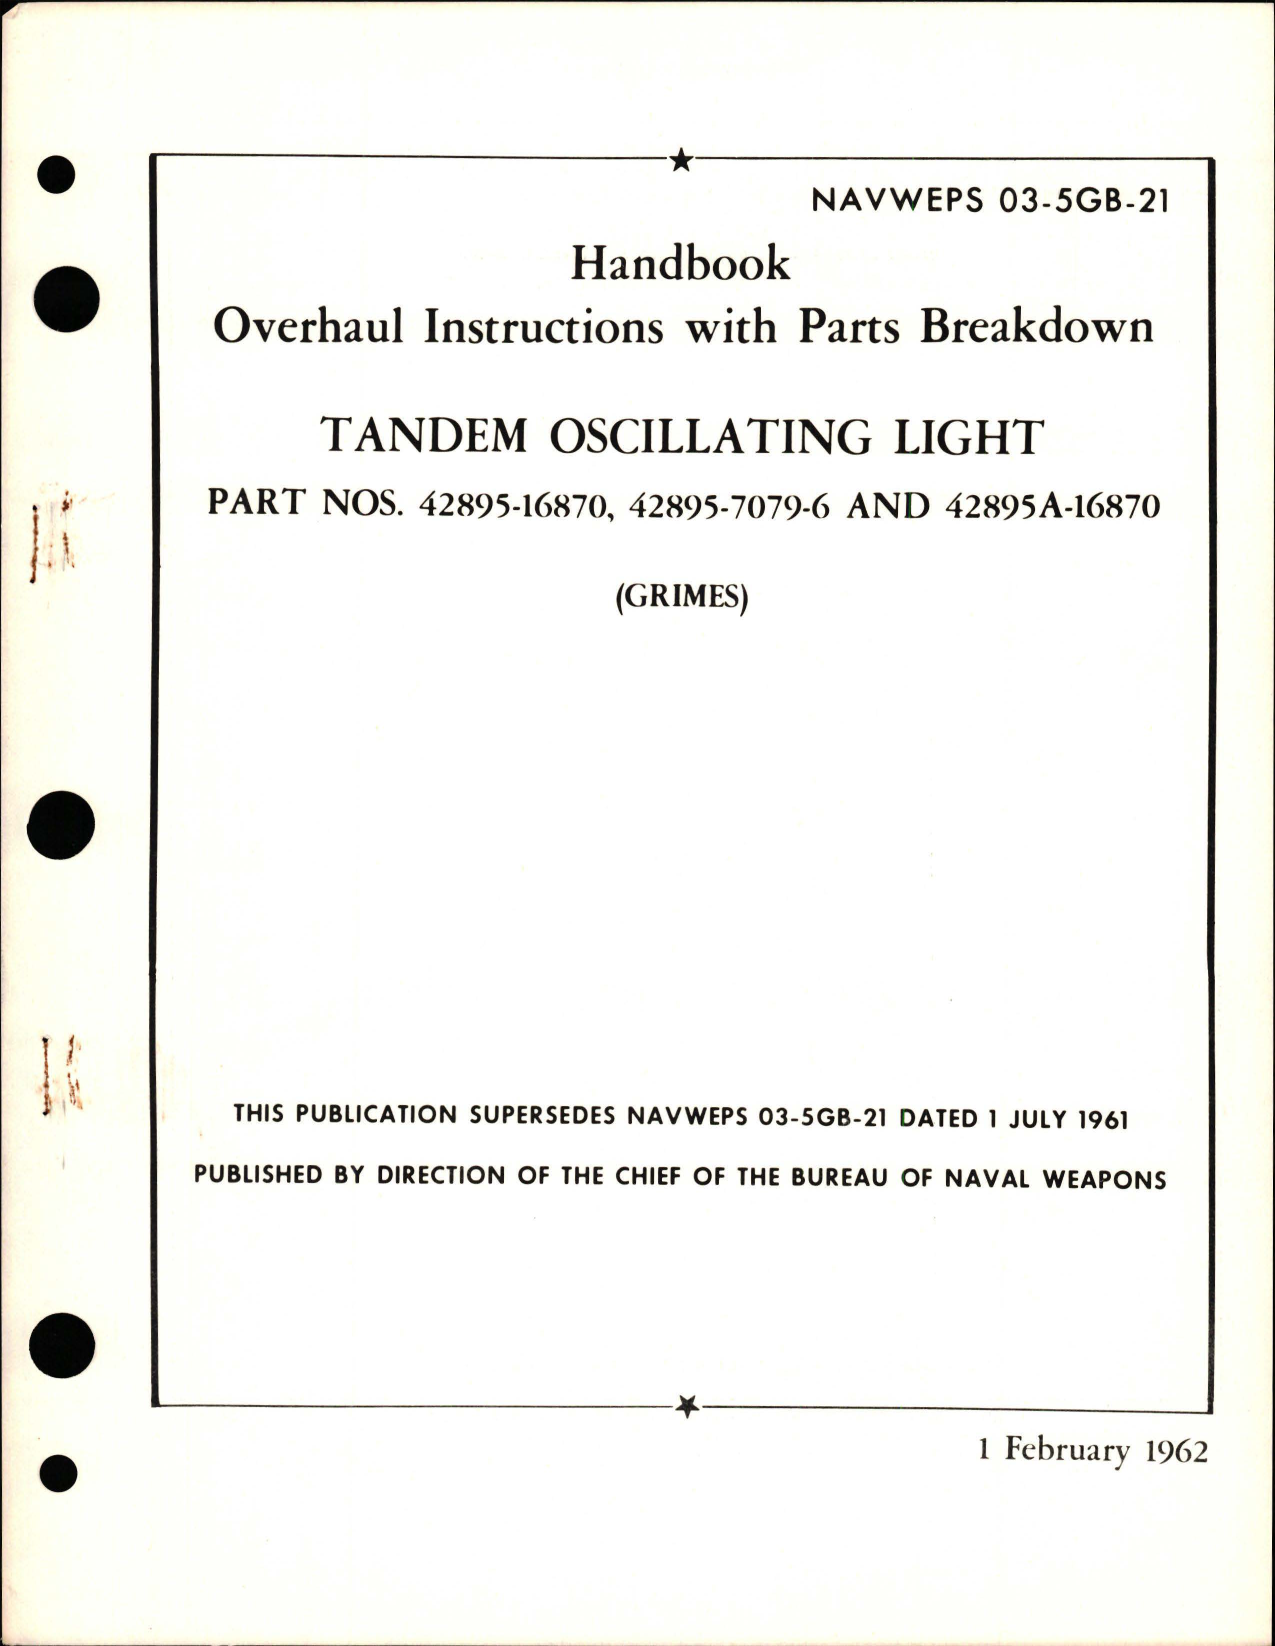 Sample page 1 from AirCorps Library document: Overhaul Instructions with Parts Breakdown for Tandem Oscillating Light - Parts 42895-16870, 42895-7079-6, and 42895A-16870 